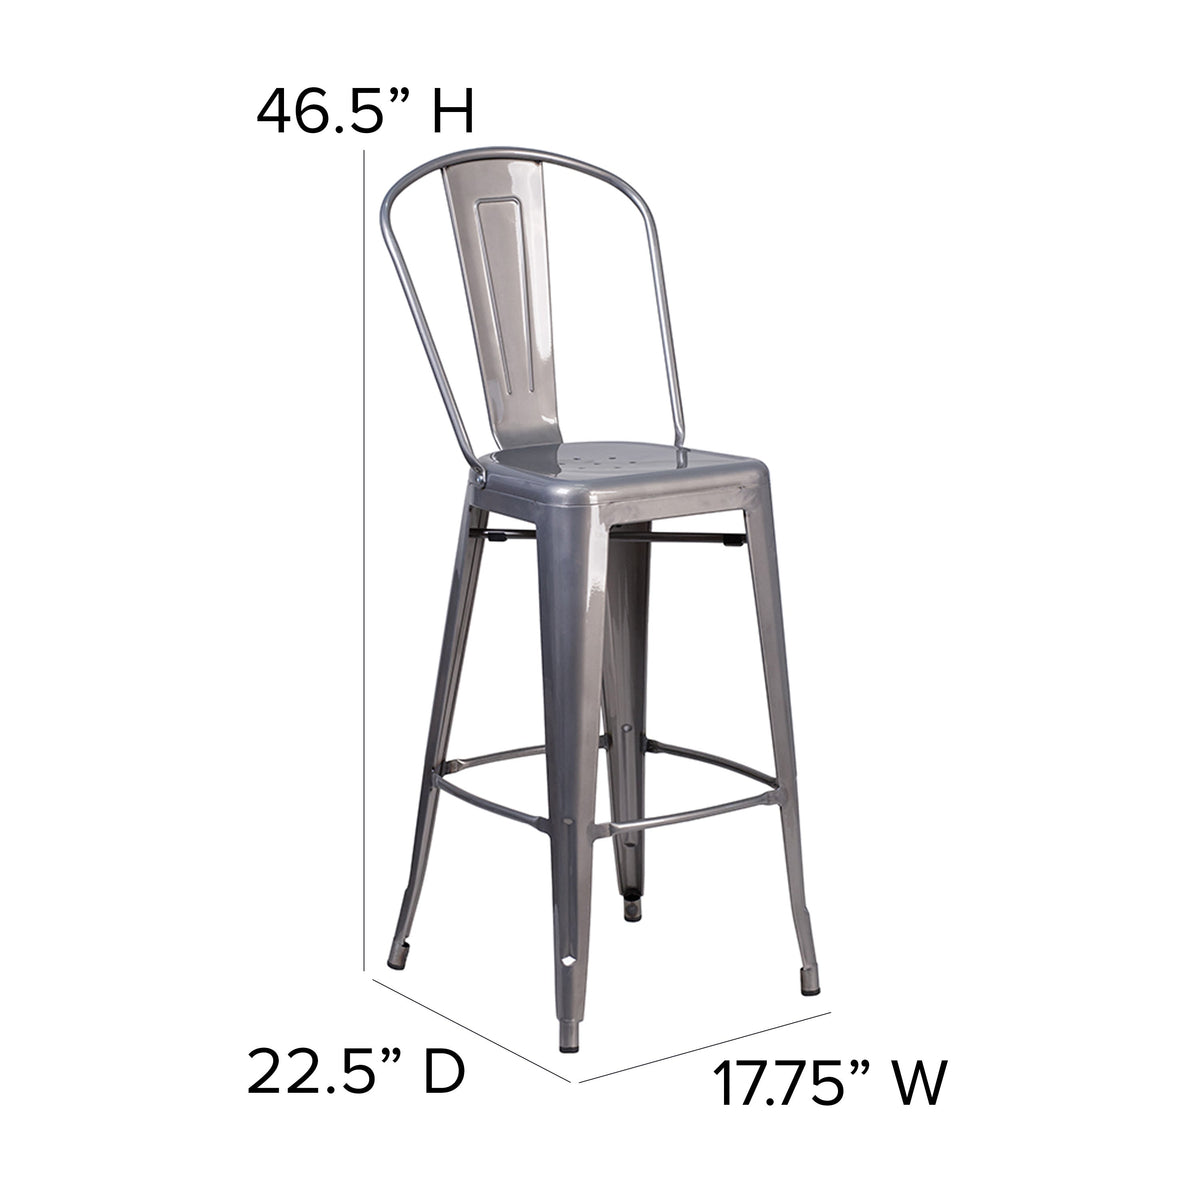 Teak Seat/Clear Coated Frame |#| Indoor Bar Height Stool with Poly Resin Colorful Seat - Clear Coated/Teak